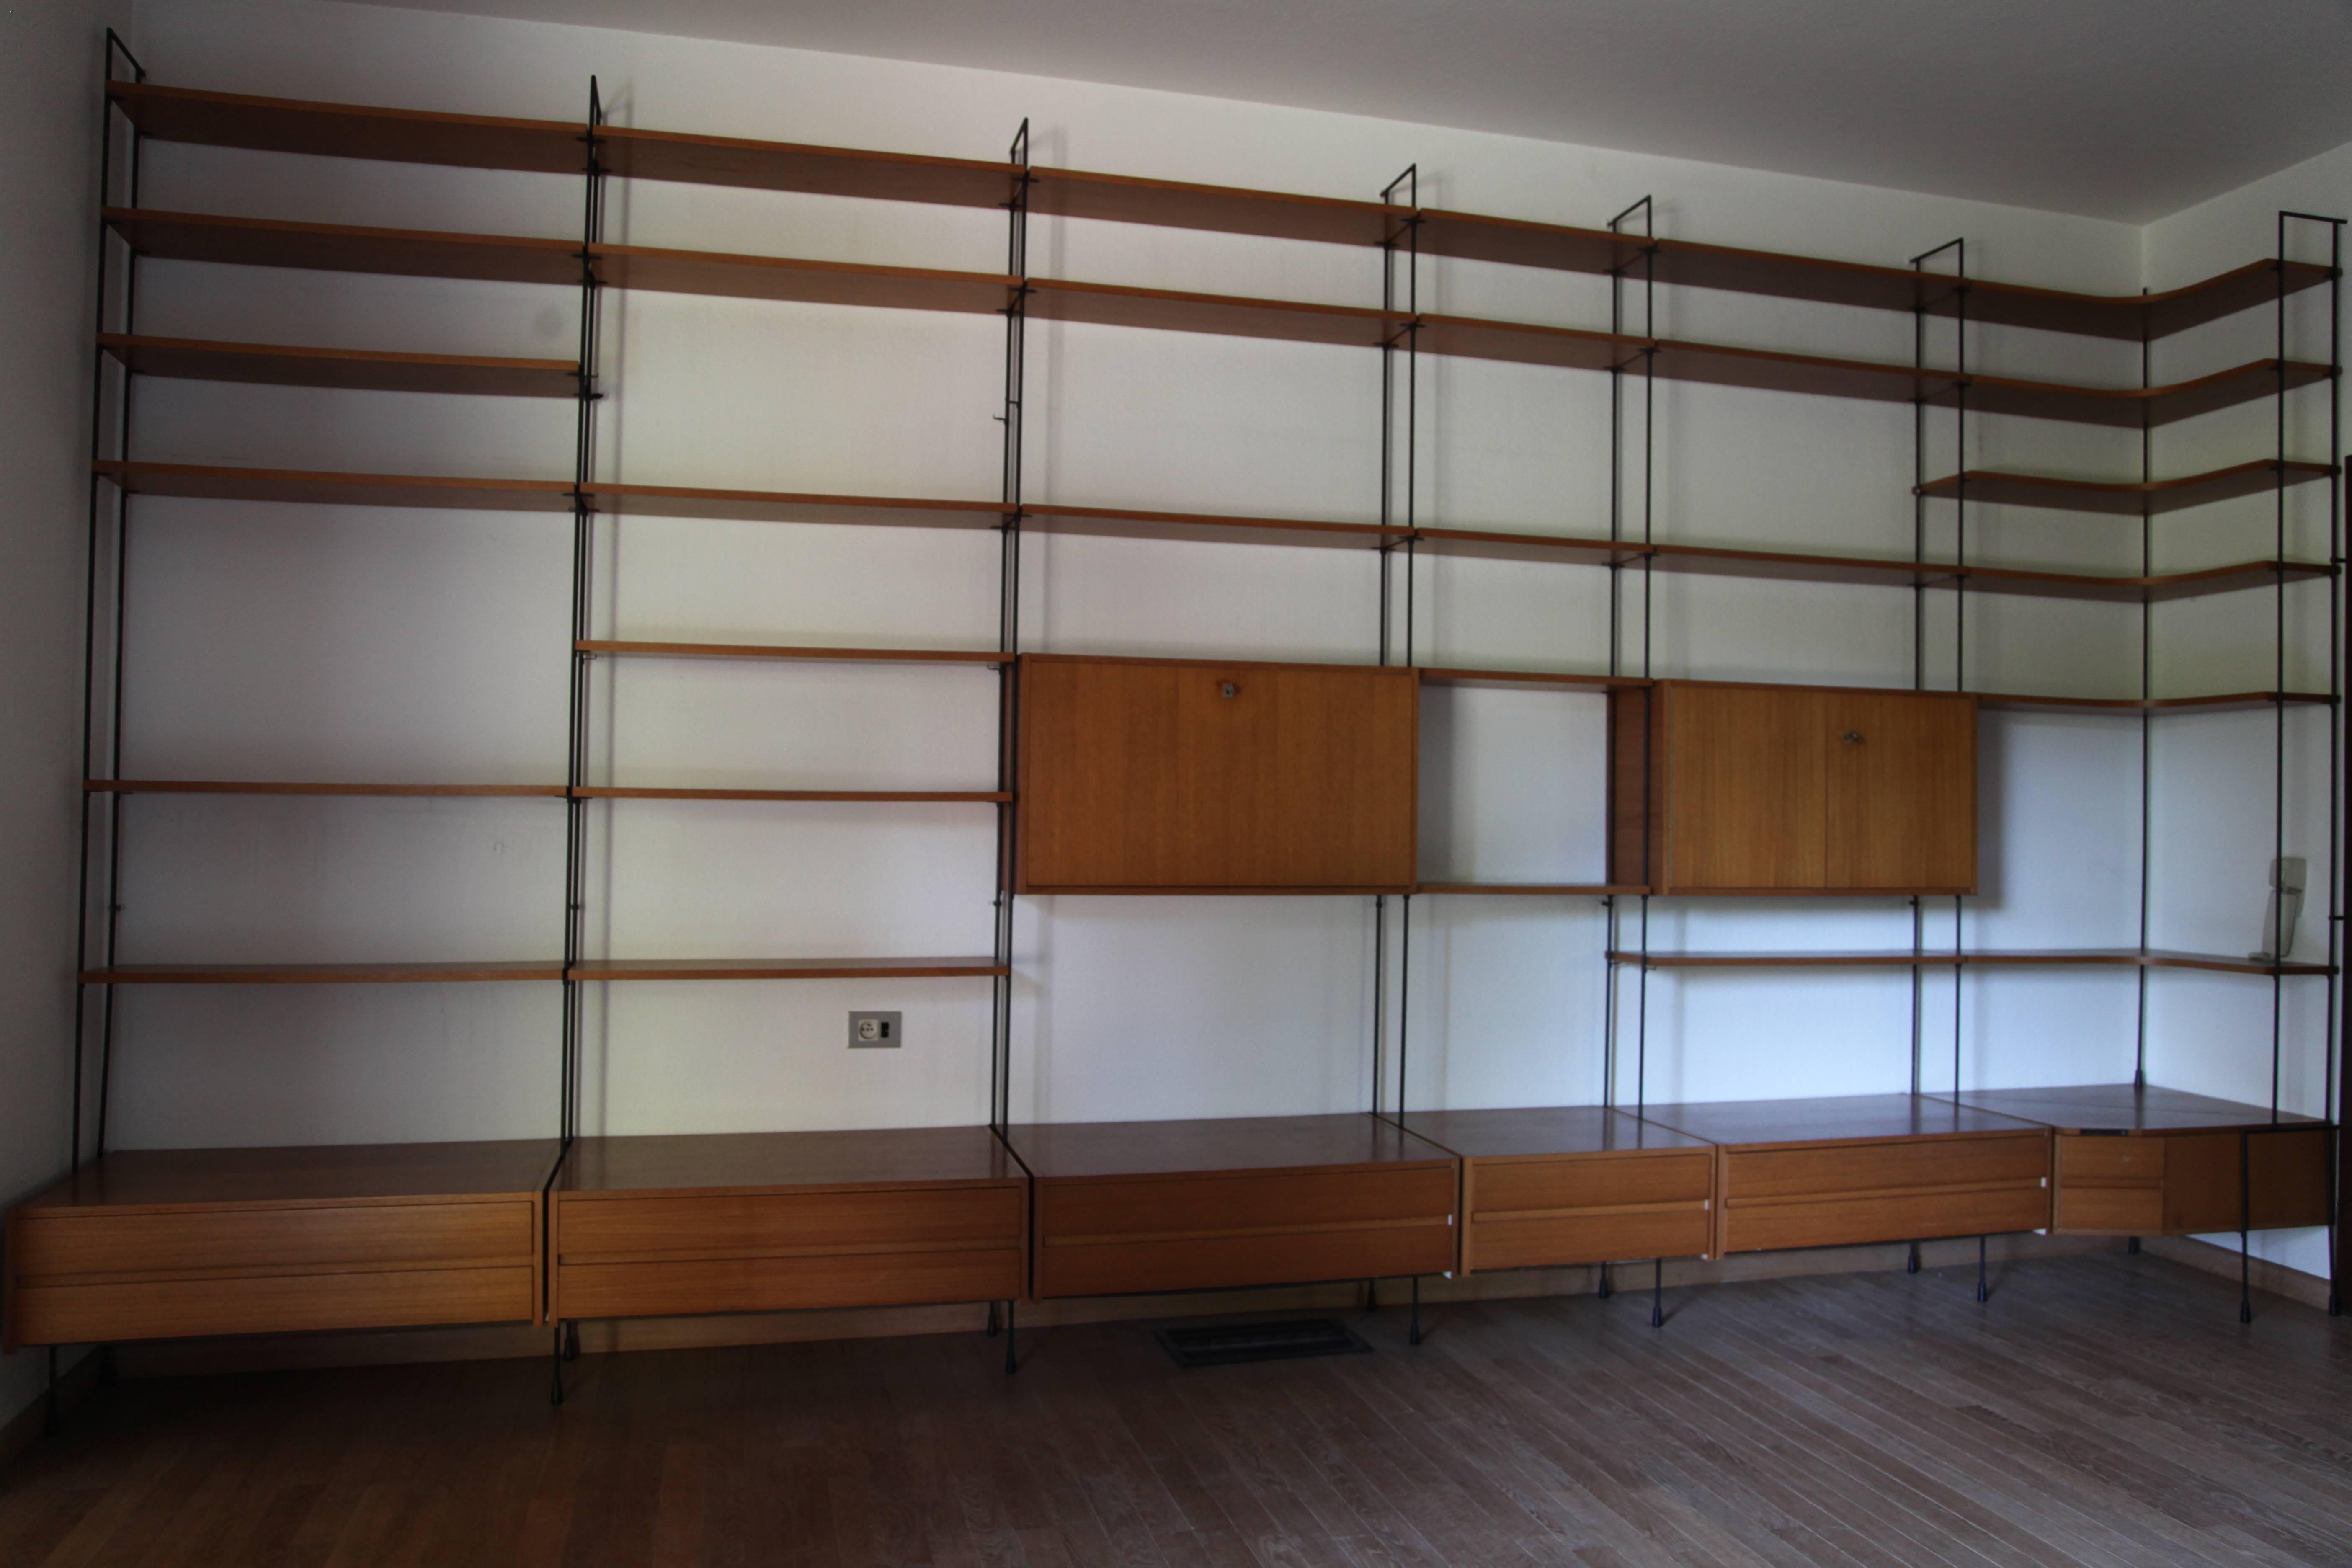 Modular Wall Unit Shelving System in Teak by Hilker, 1960s, Germany 1